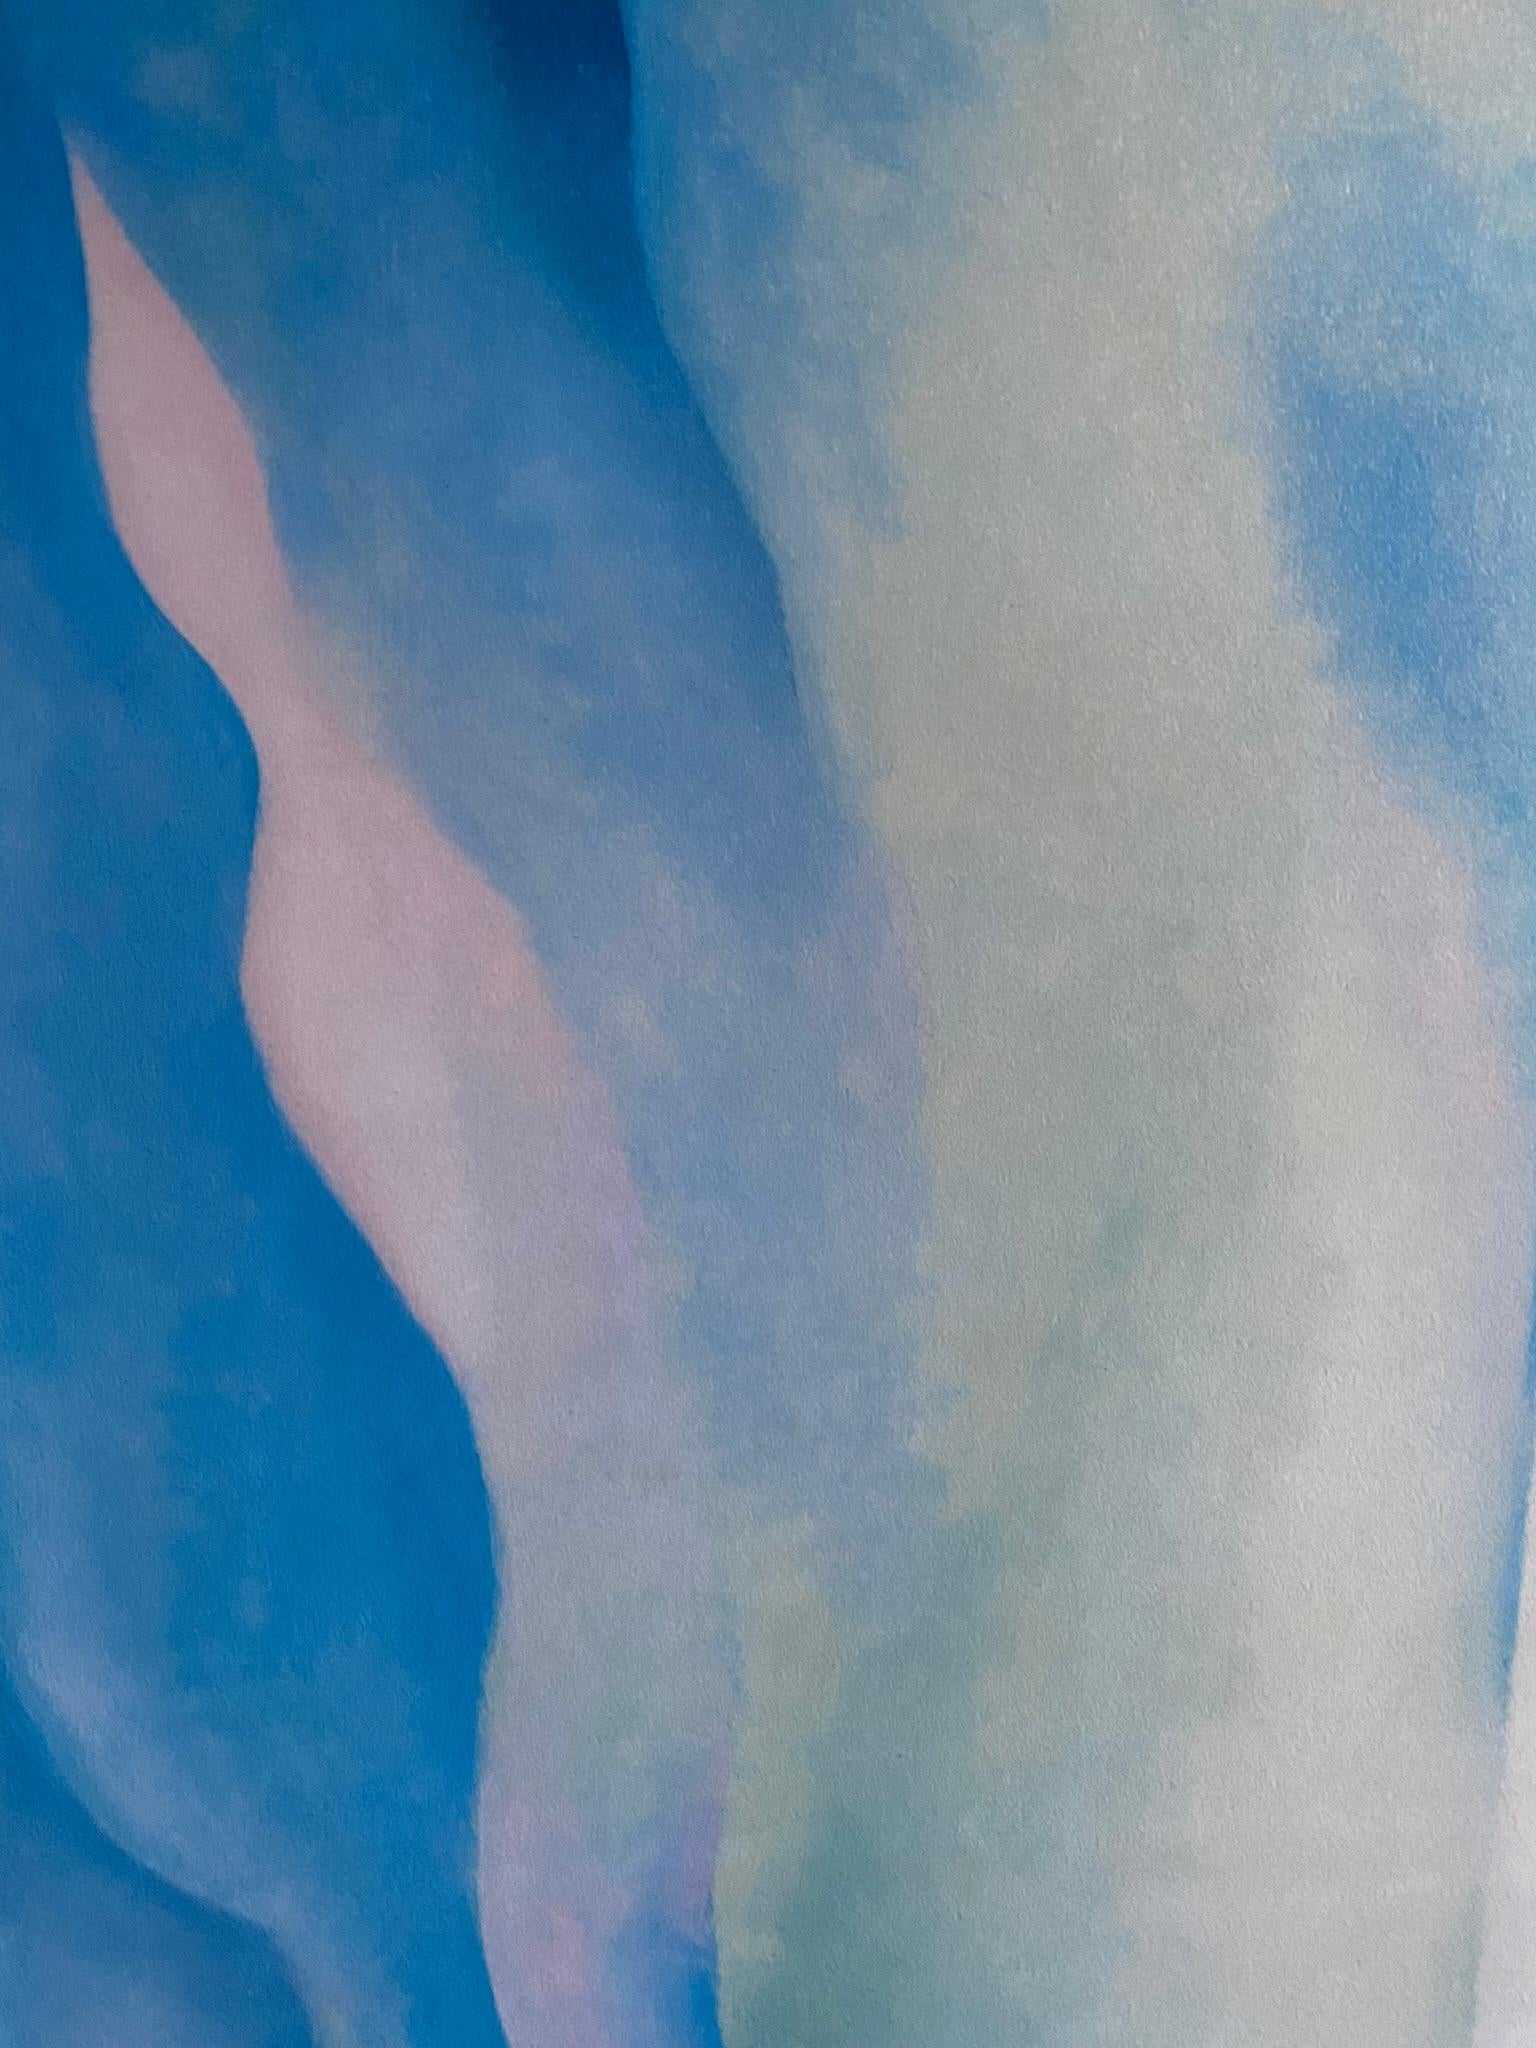 Georgia O'Keeffe-High Quality print by MoMA circa1997-Abstraction Blue-GSYStudio For Sale 10